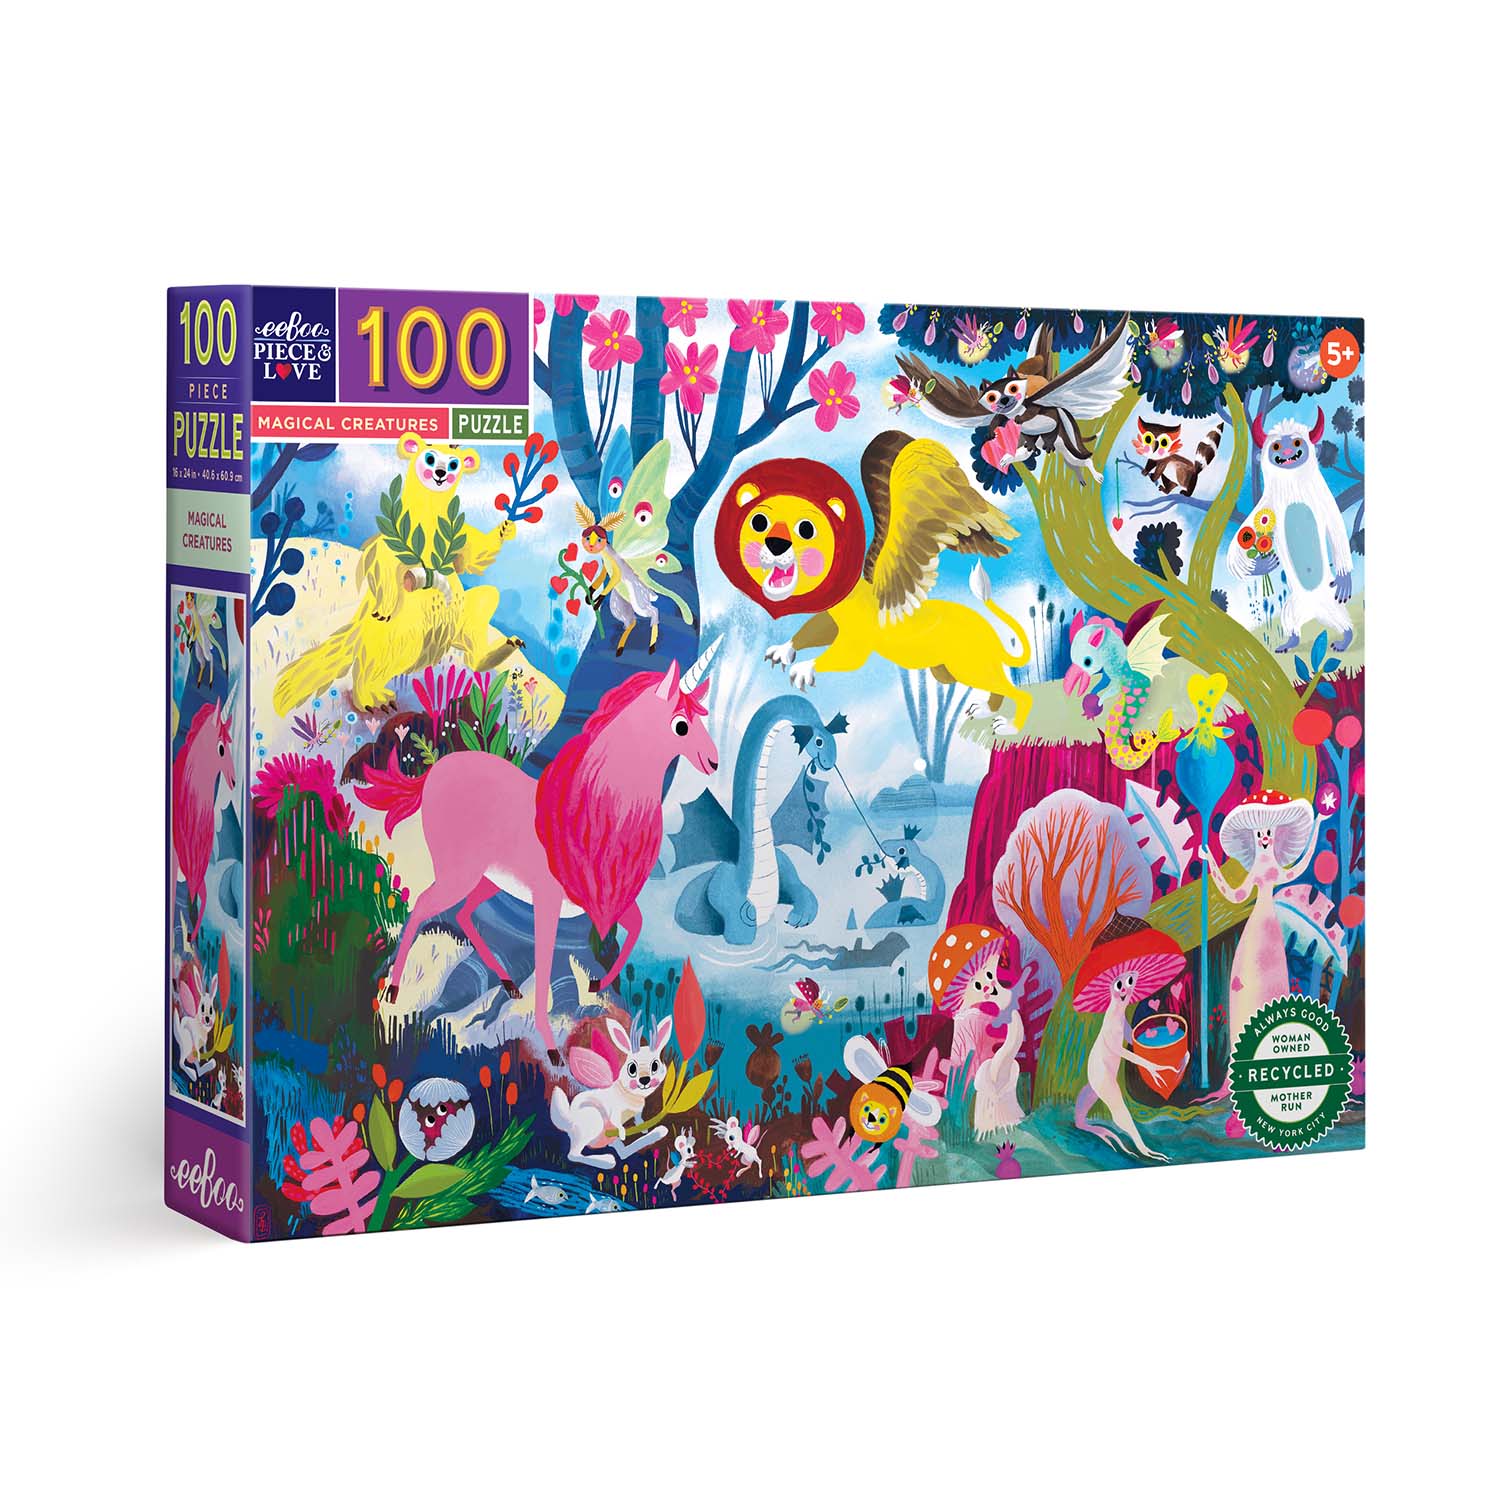 Magical Creatures Fantasy Jigsaw Puzzle